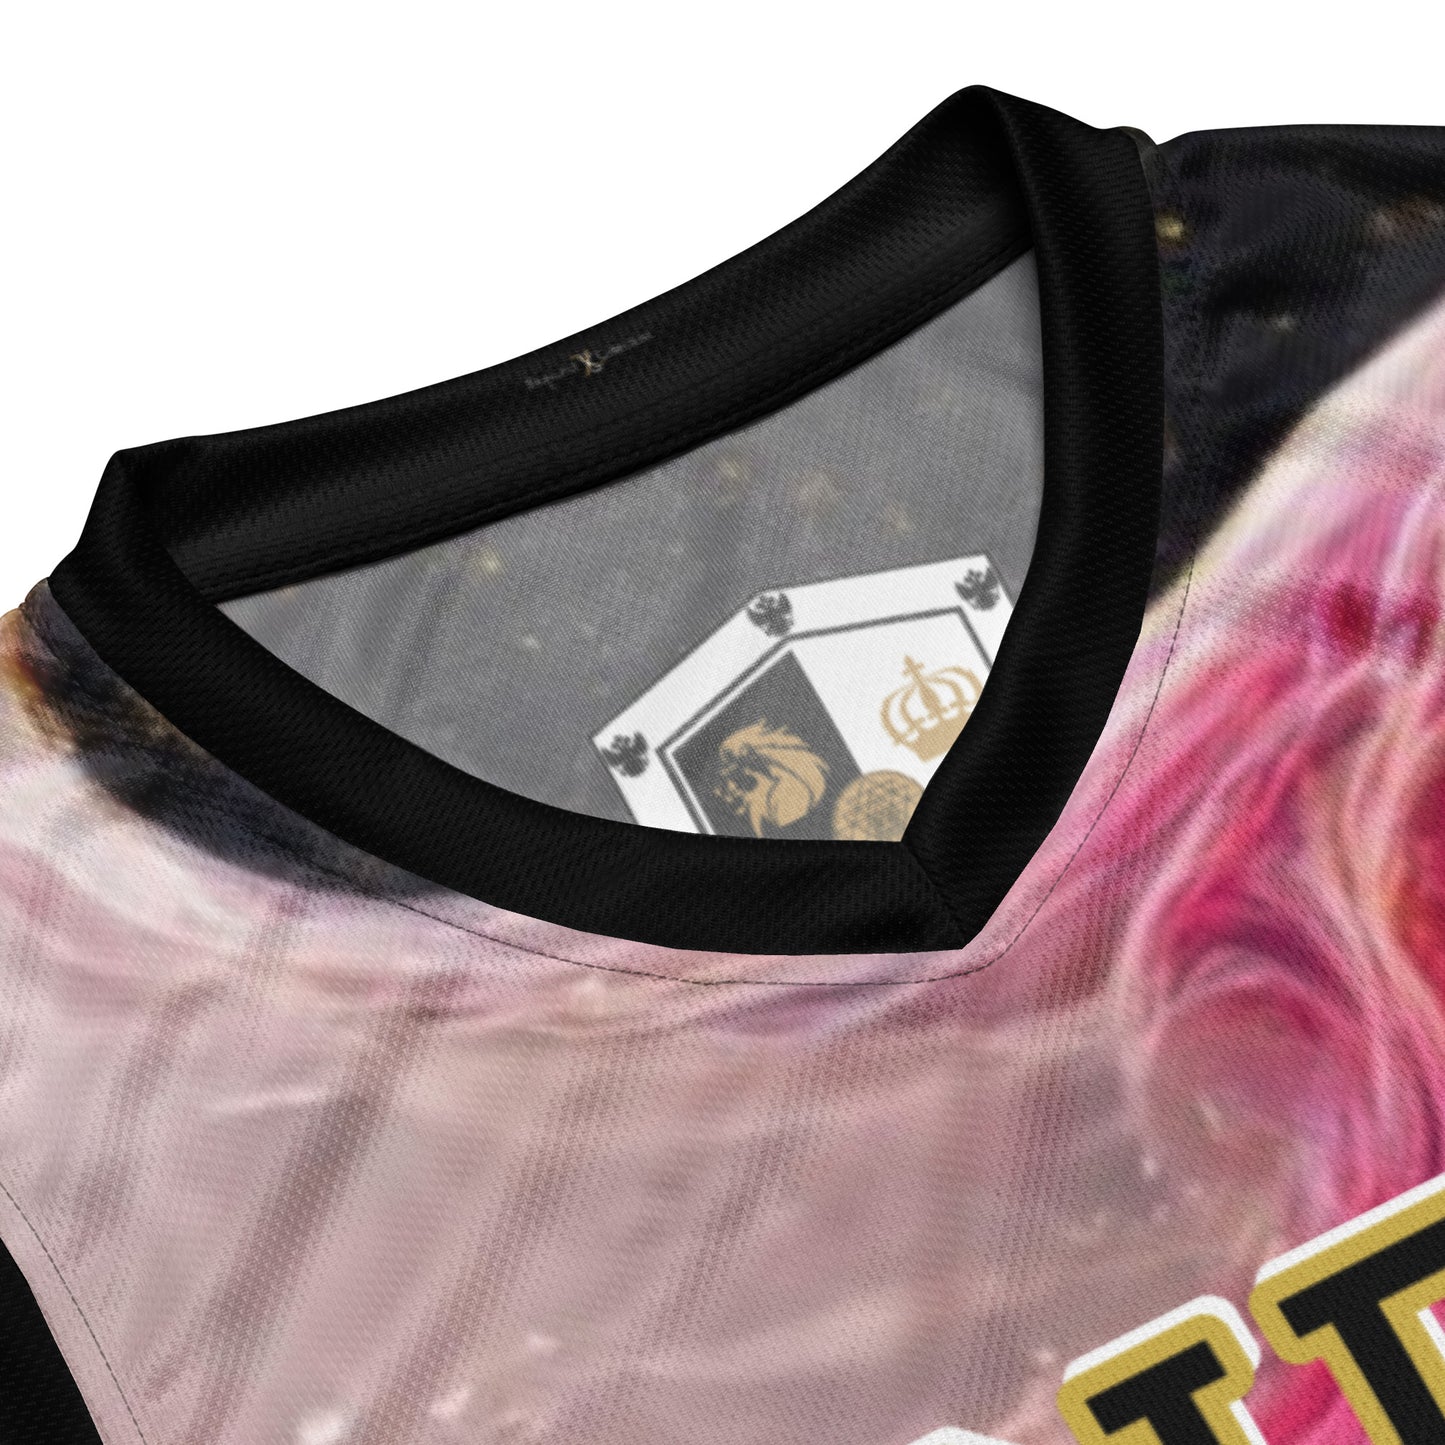 8xquiZit Collection T8T Pynk, Black, N Gold Marble  Unisex Basketball Jersey